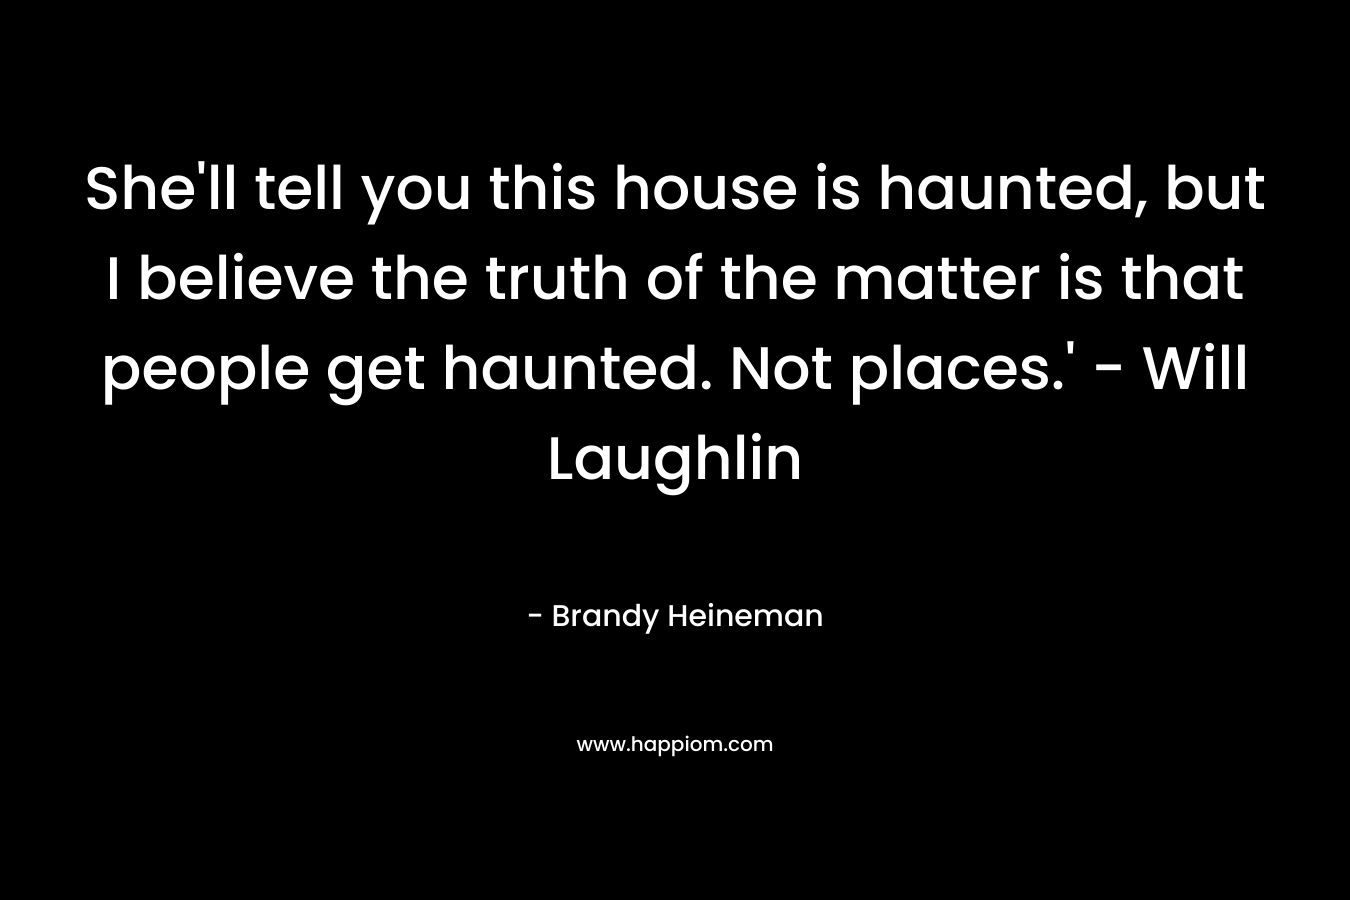 She'll tell you this house is haunted, but I believe the truth of the matter is that people get haunted. Not places.' - Will Laughlin